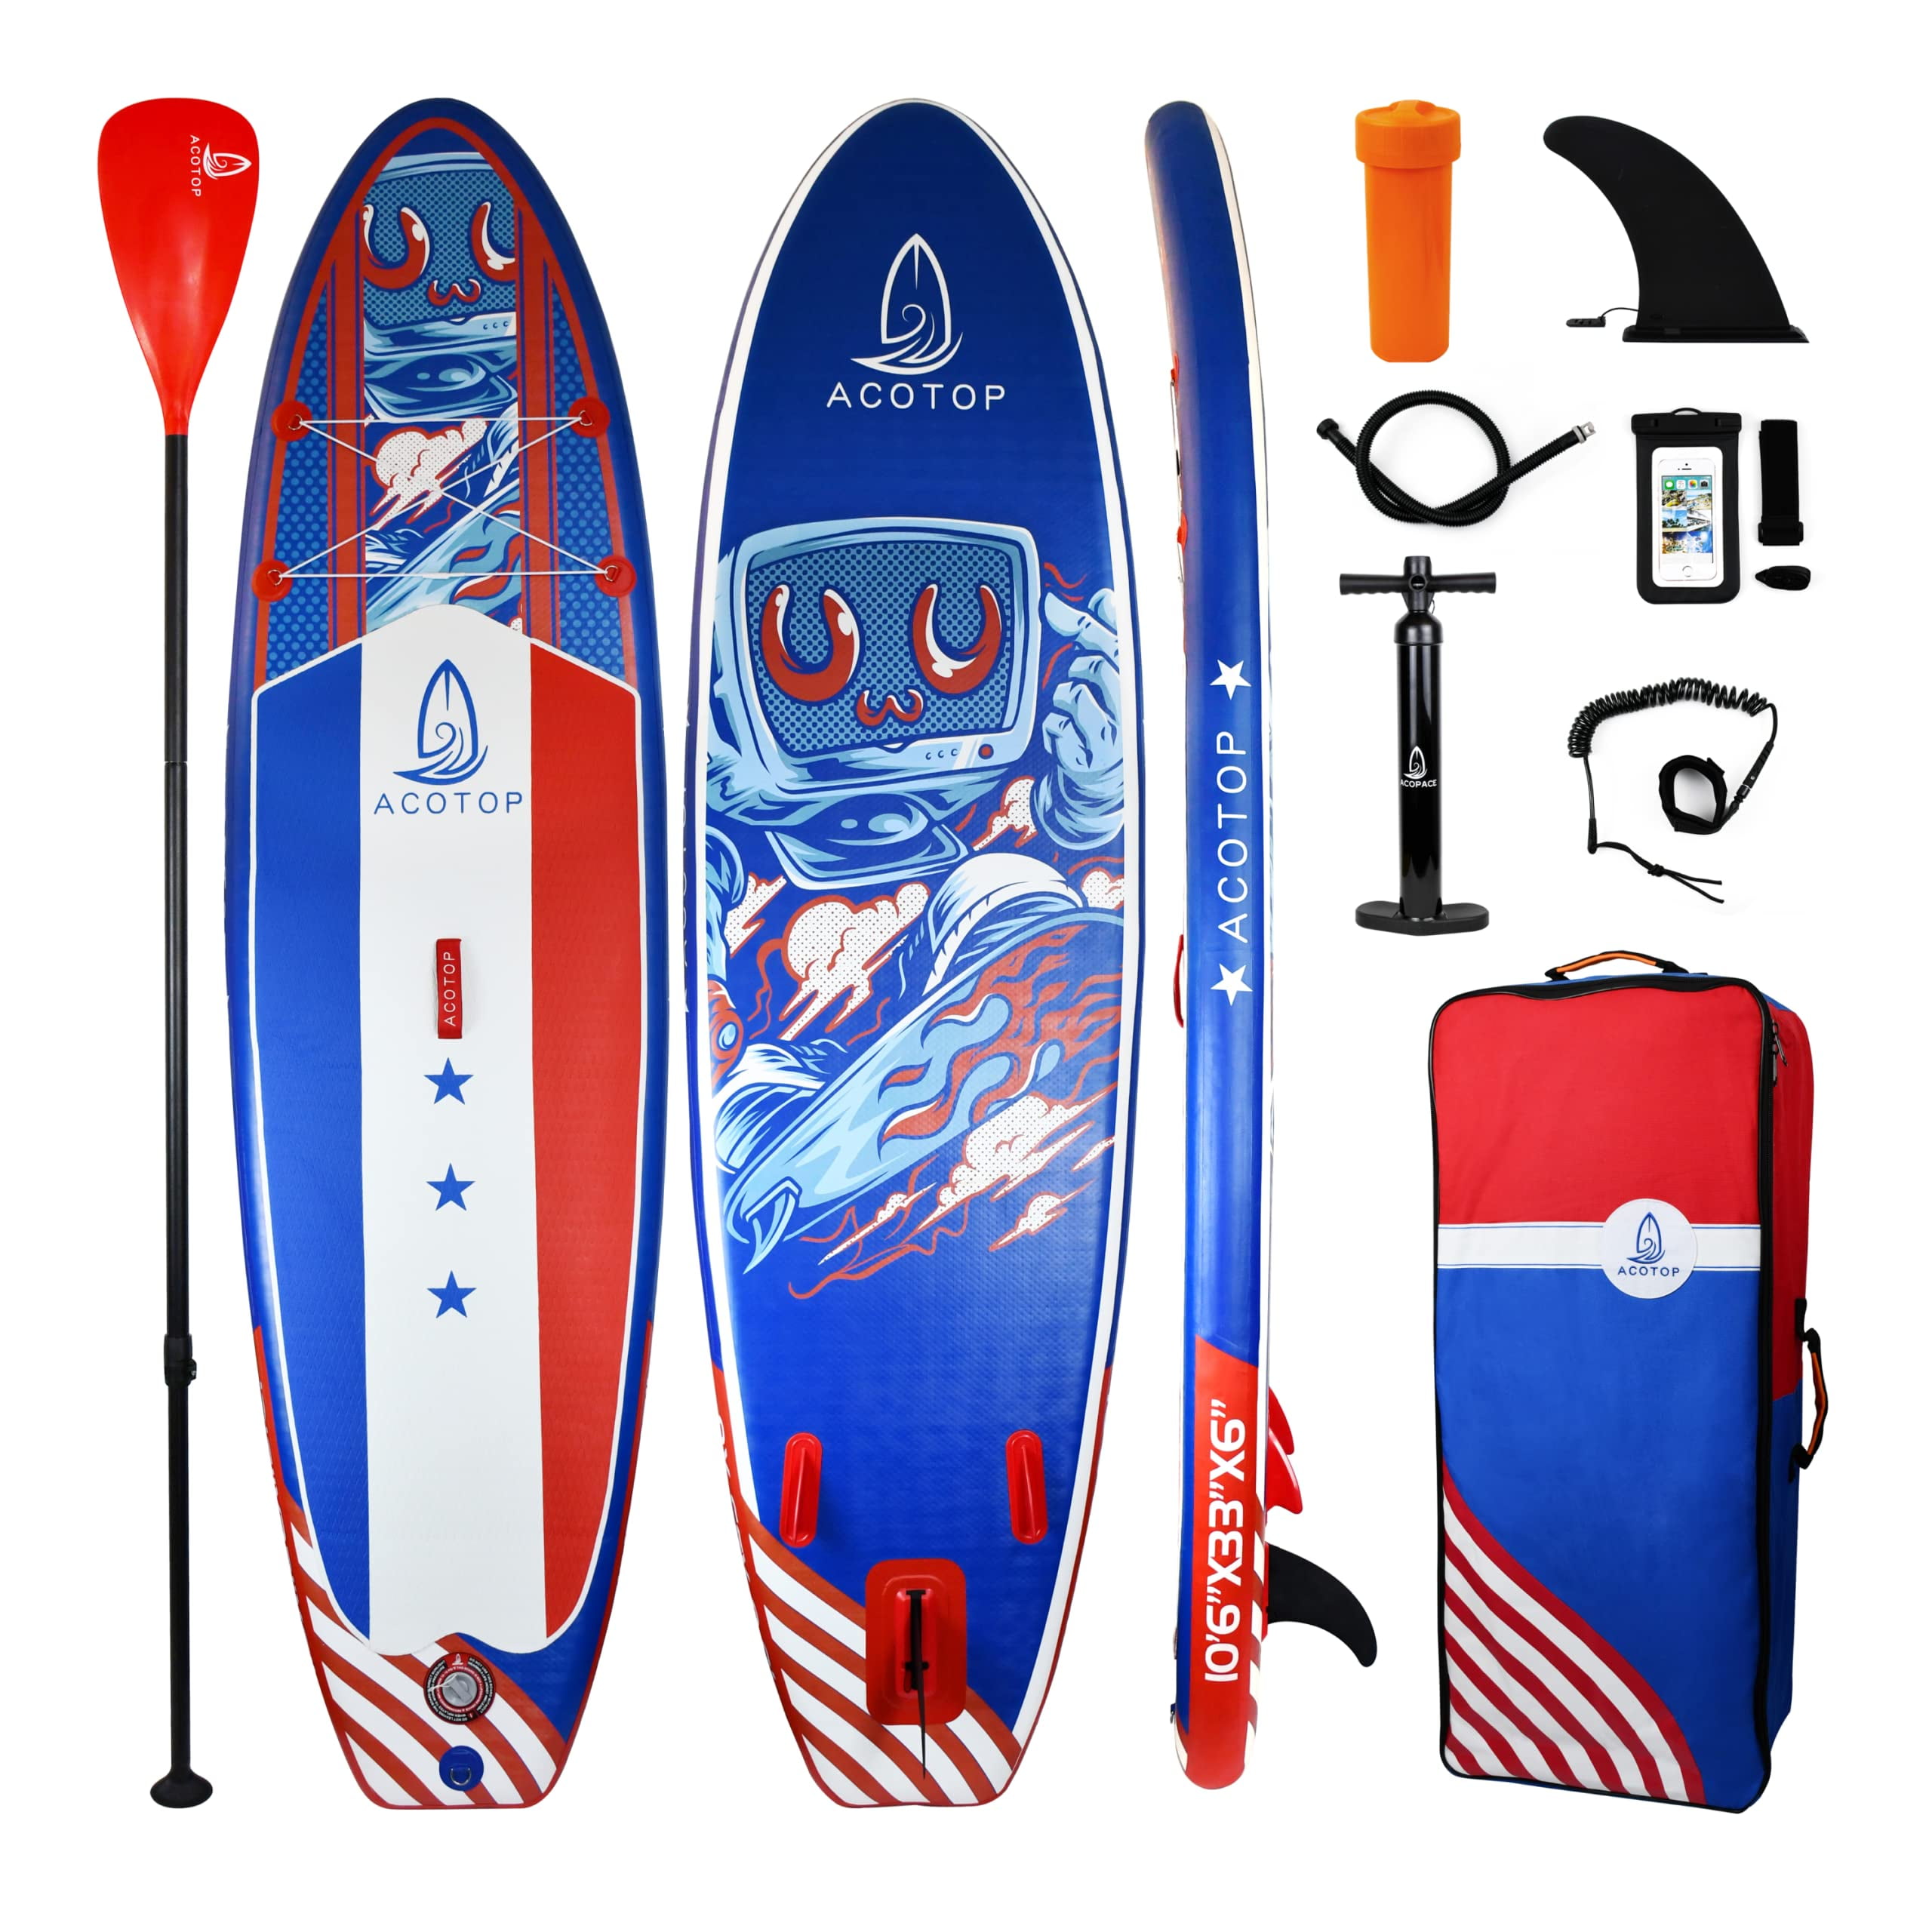 Paddle Board 10'6x32x6, Dreizack Paddle Boards for Adults Extra